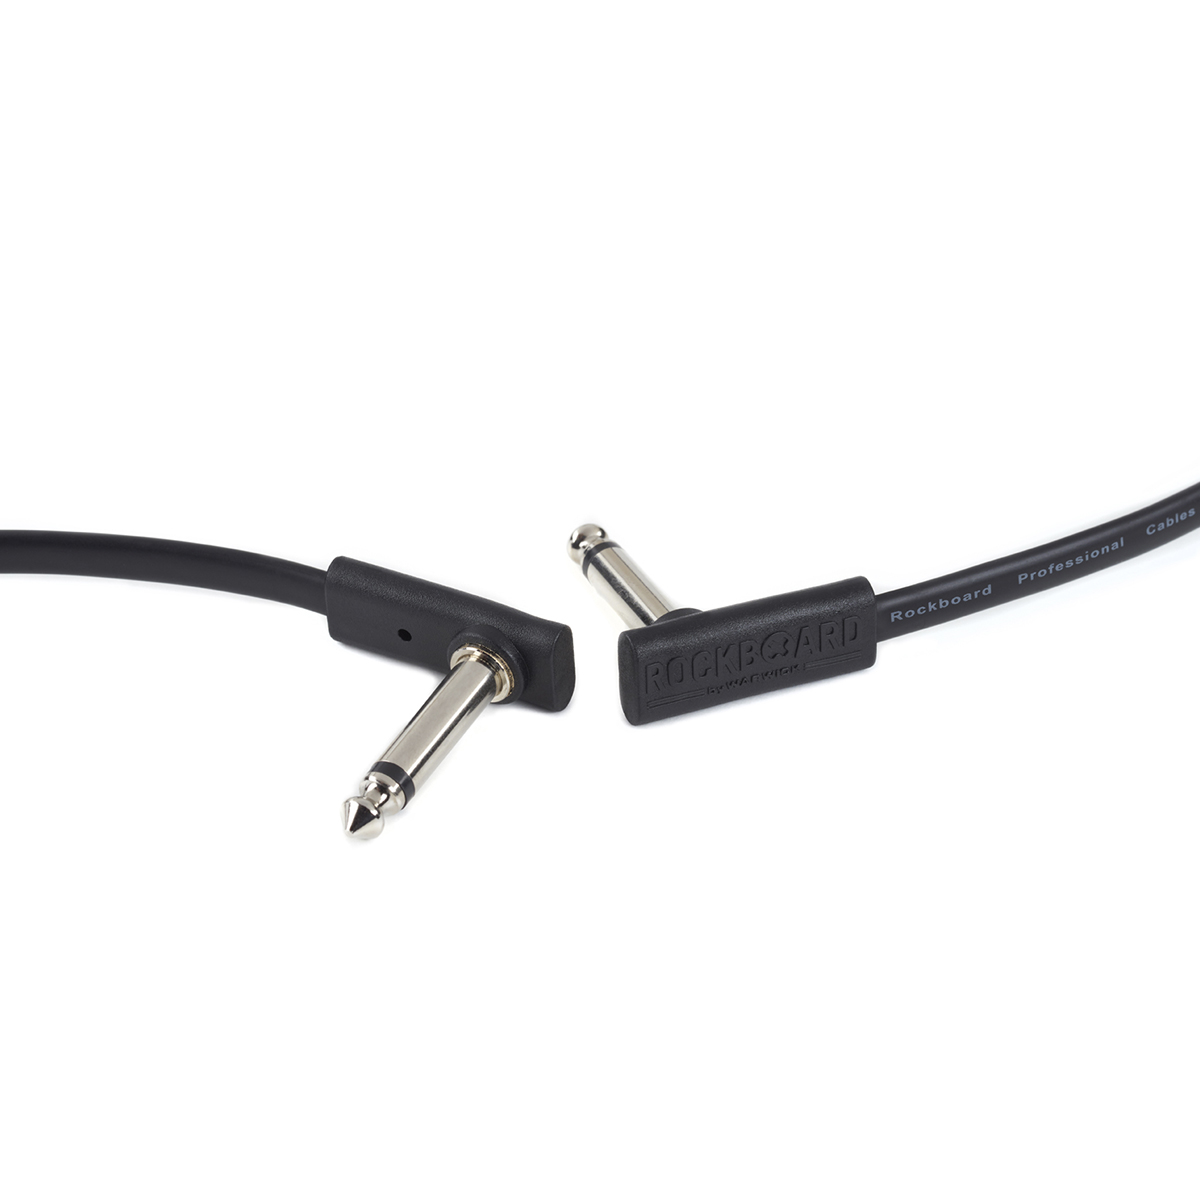 CABO P/ PEDAL 5CM FLAT PATCH CABLE RBOCABPCF5BW - ROCKBOARD